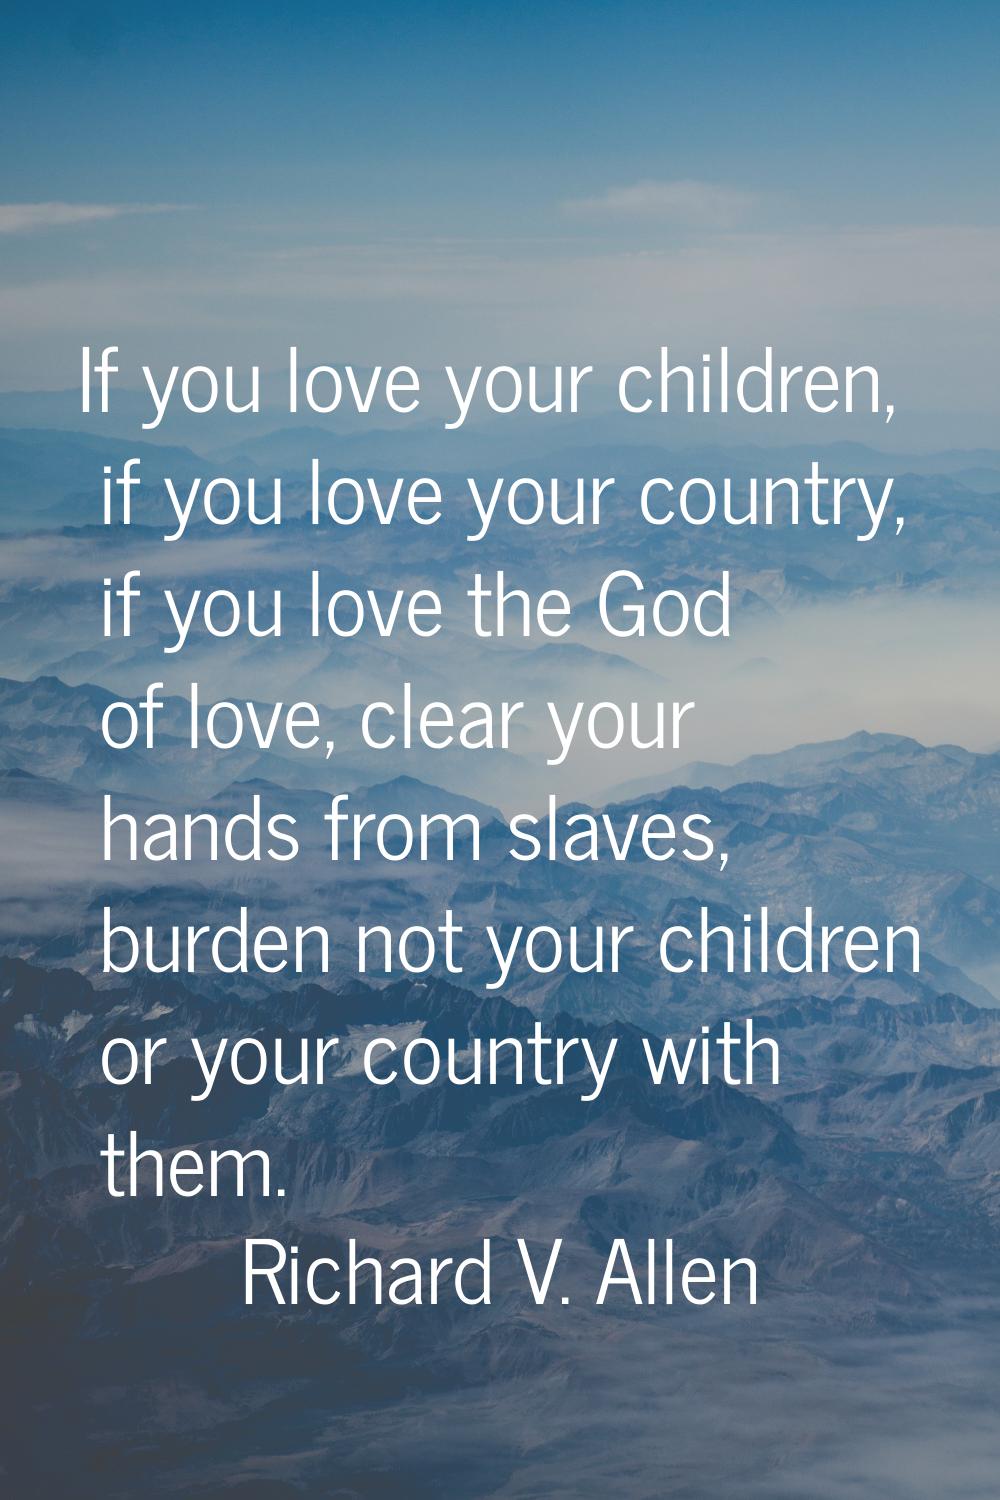 If you love your children, if you love your country, if you love the God of love, clear your hands 